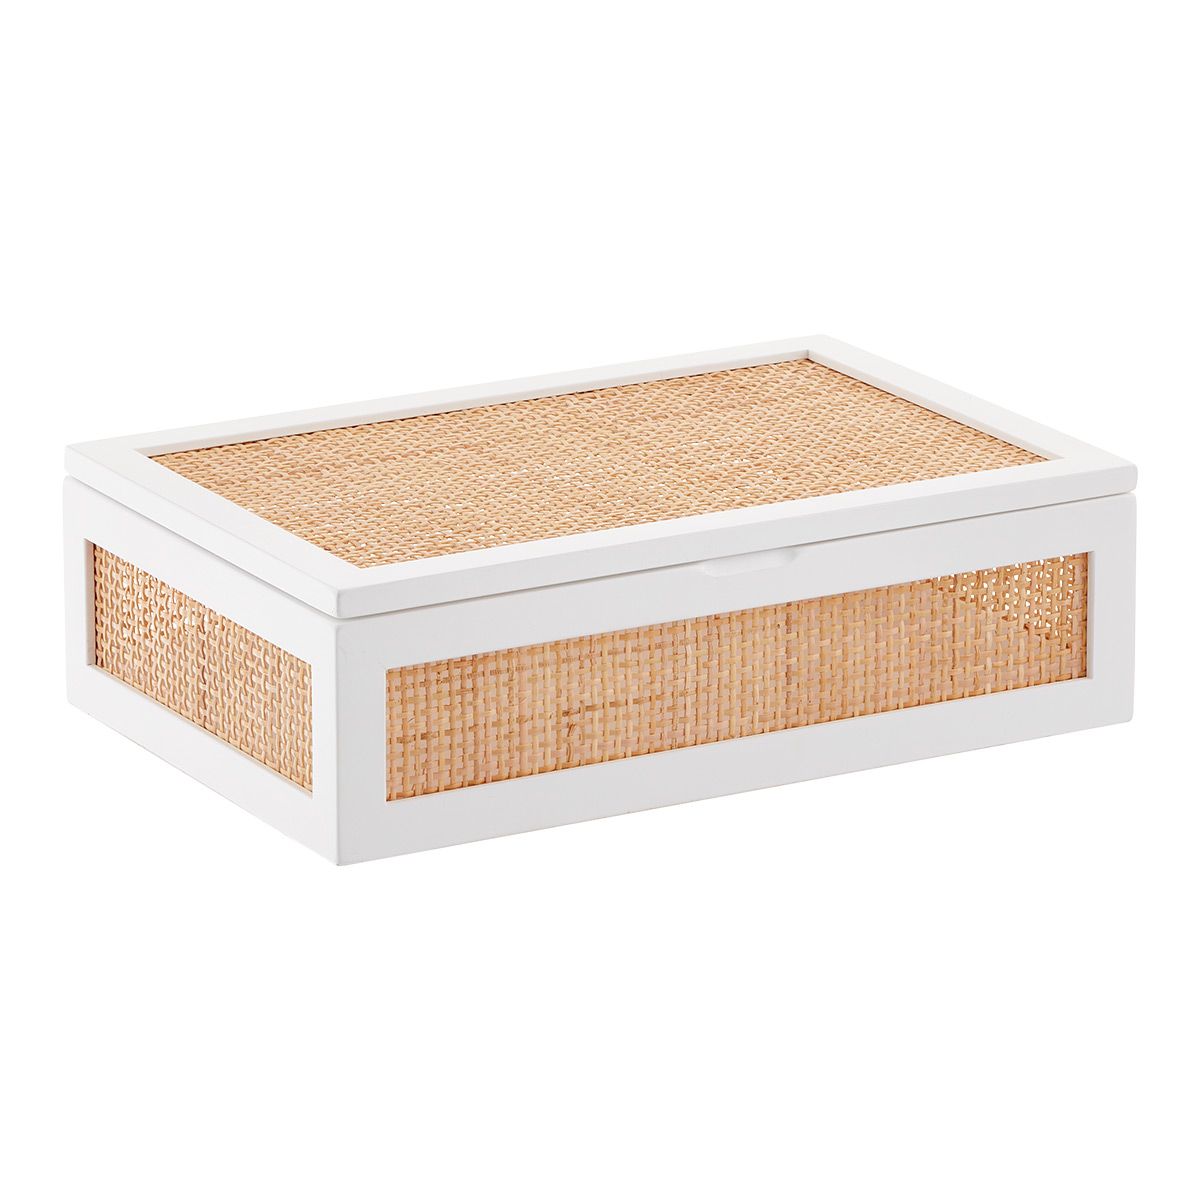 The Container Store Artisan Rattan Cane Hinged Lid Box | The Container Store